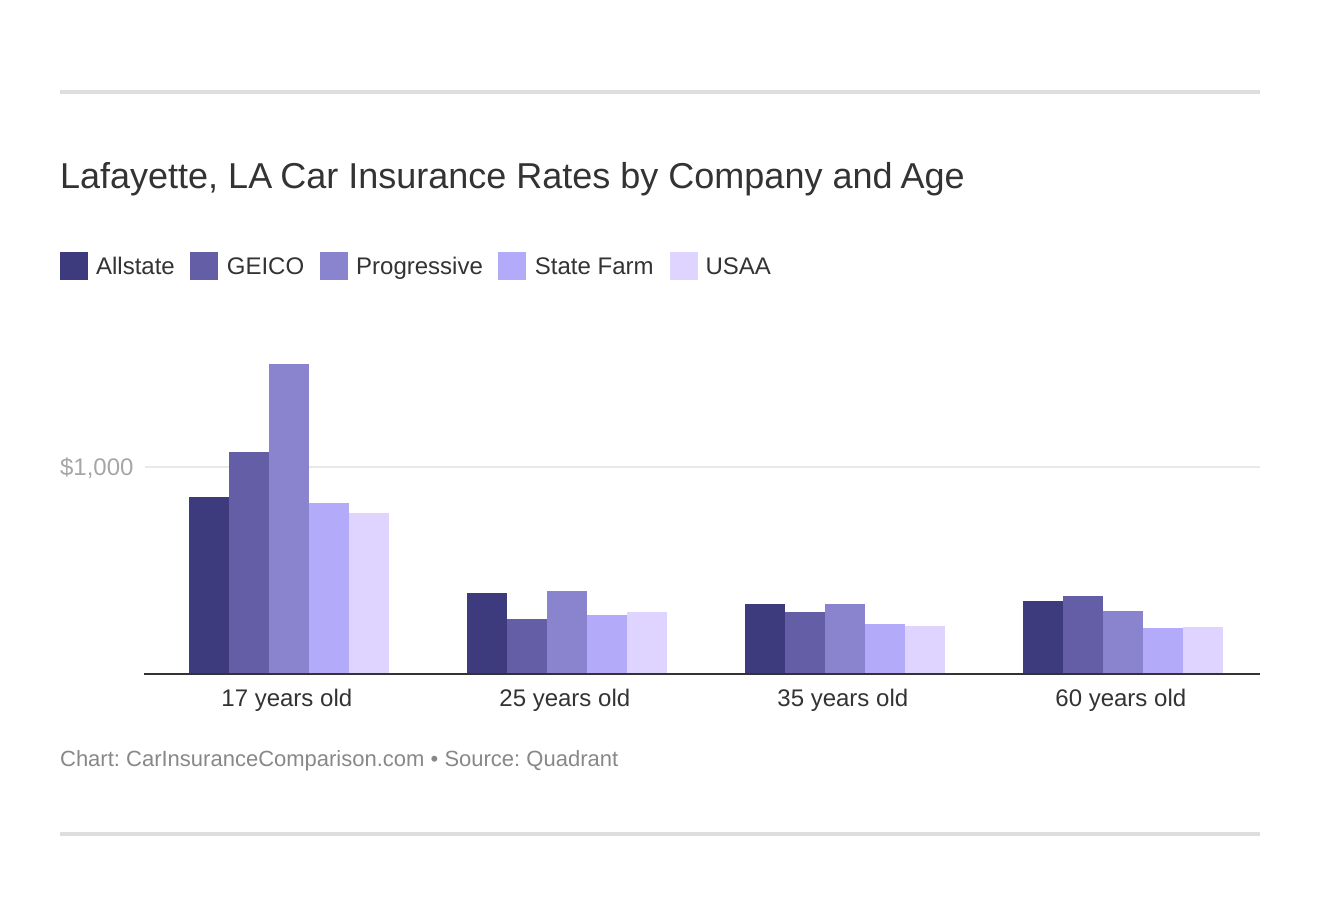 Lafayette, LA Car Insurance Rates by Company and Age